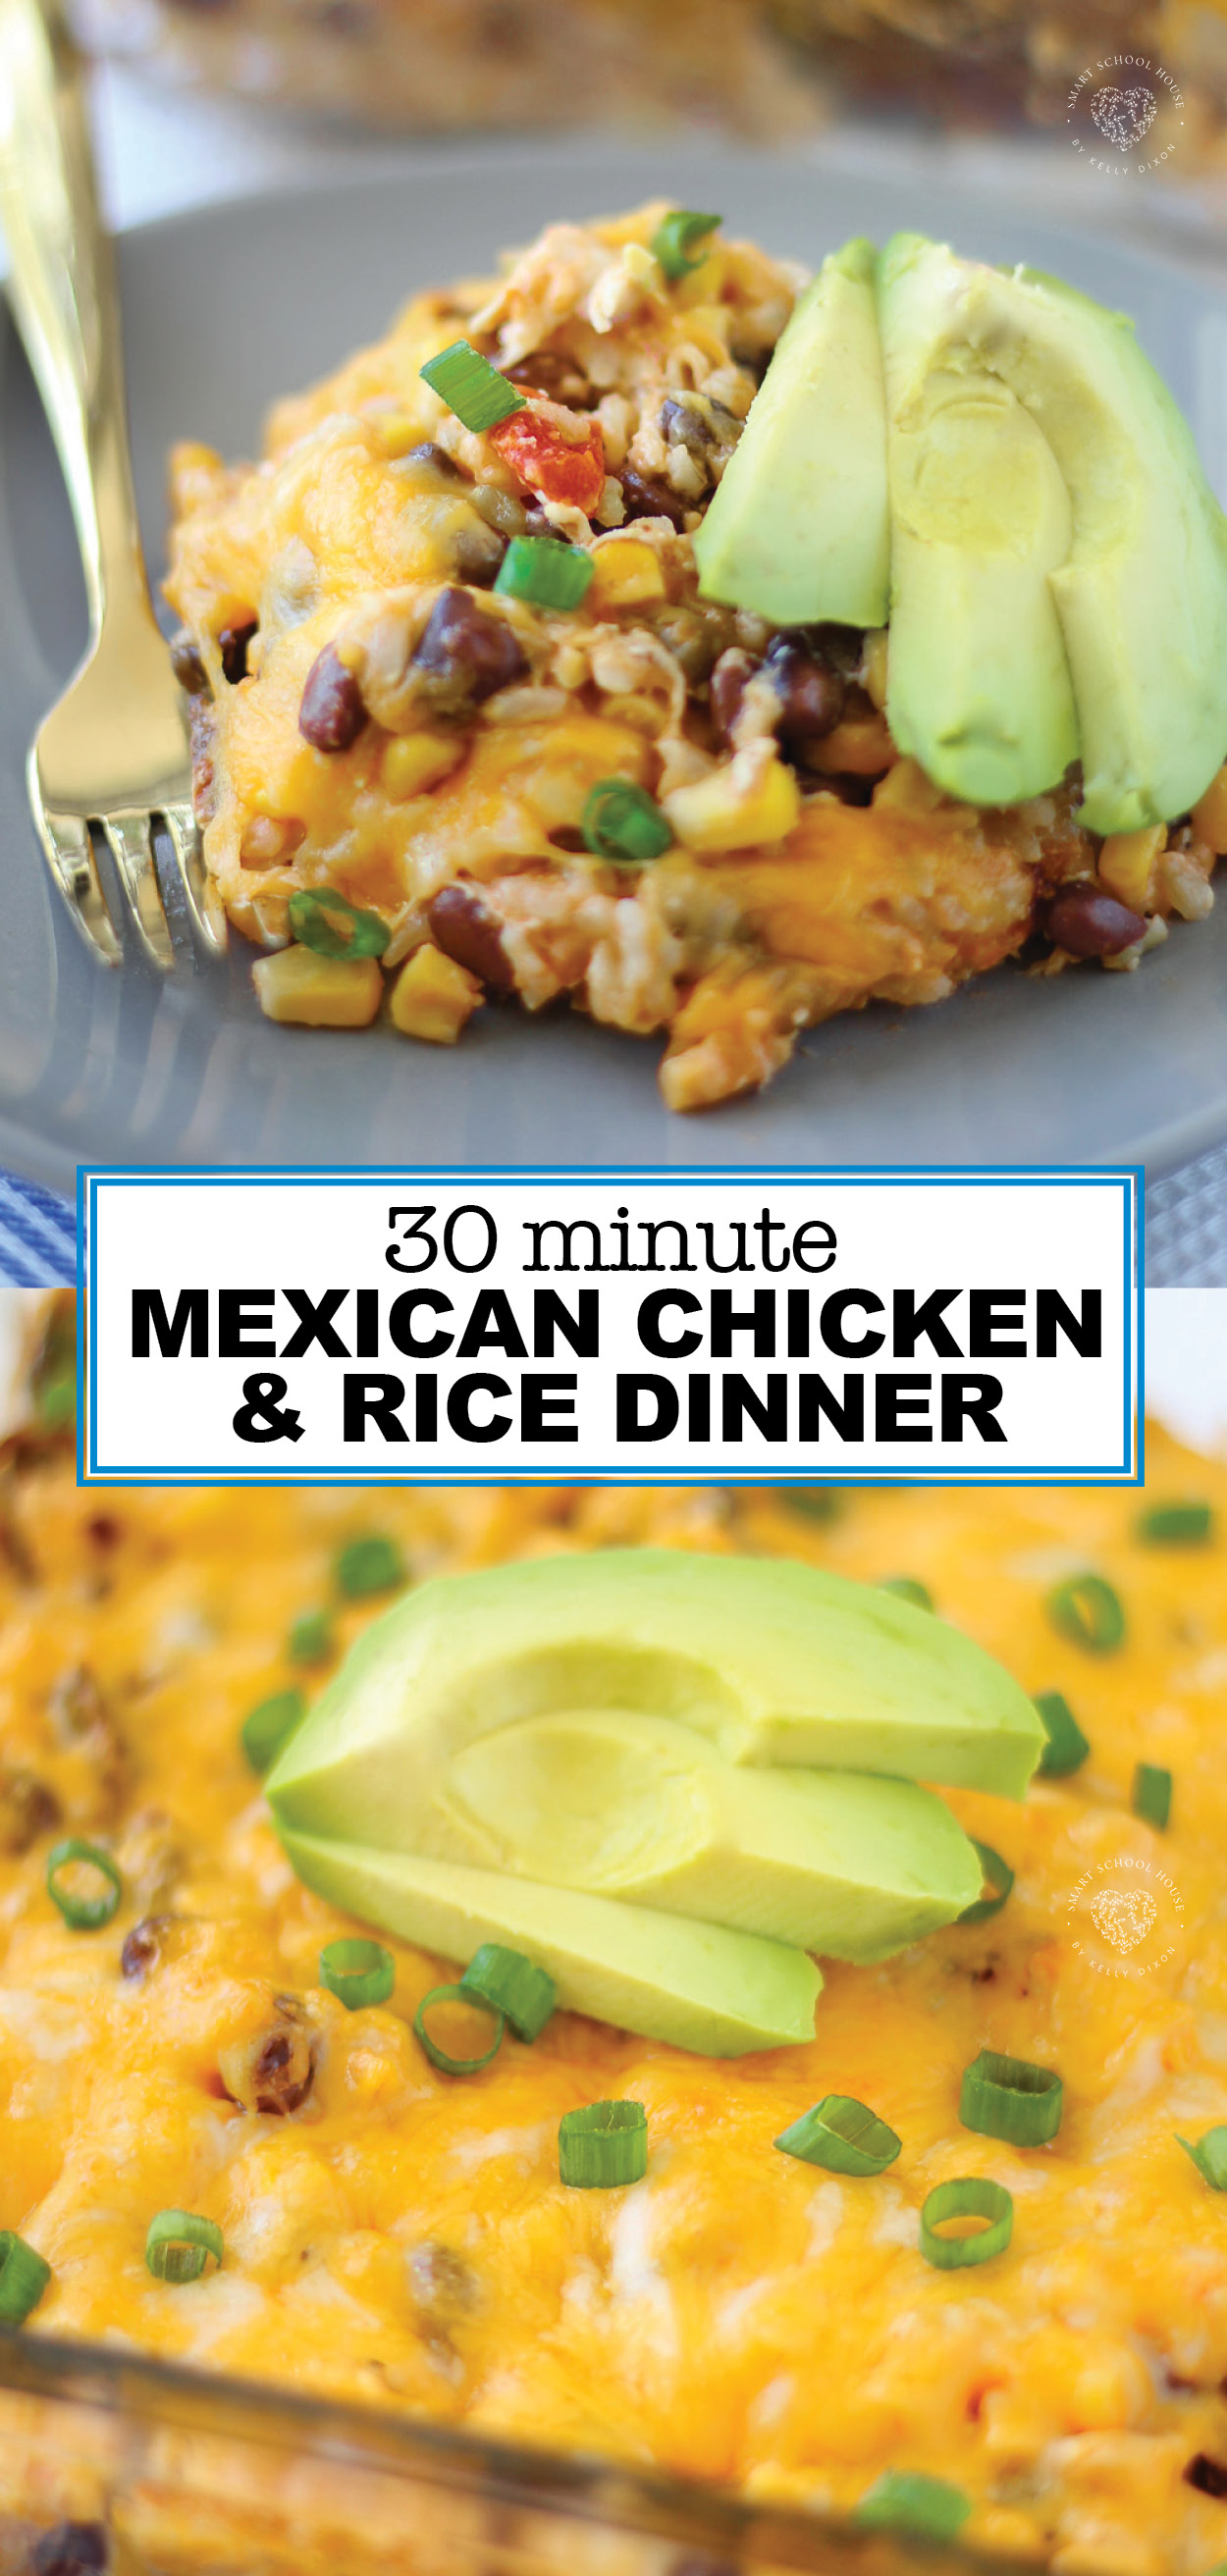 An easy and delicious meal! This dinner recipe is made in one baking dish and is done just in 30 minutes making clean up a breeze. Perfect for busy week nights! Our family LOVES Mexican food and that’s why this dinner is one of our favorites. A perfect go-to meal when you’re craving Mexican food. It’s easy, quick and is loaded with flavor. You really can’t beat it! 